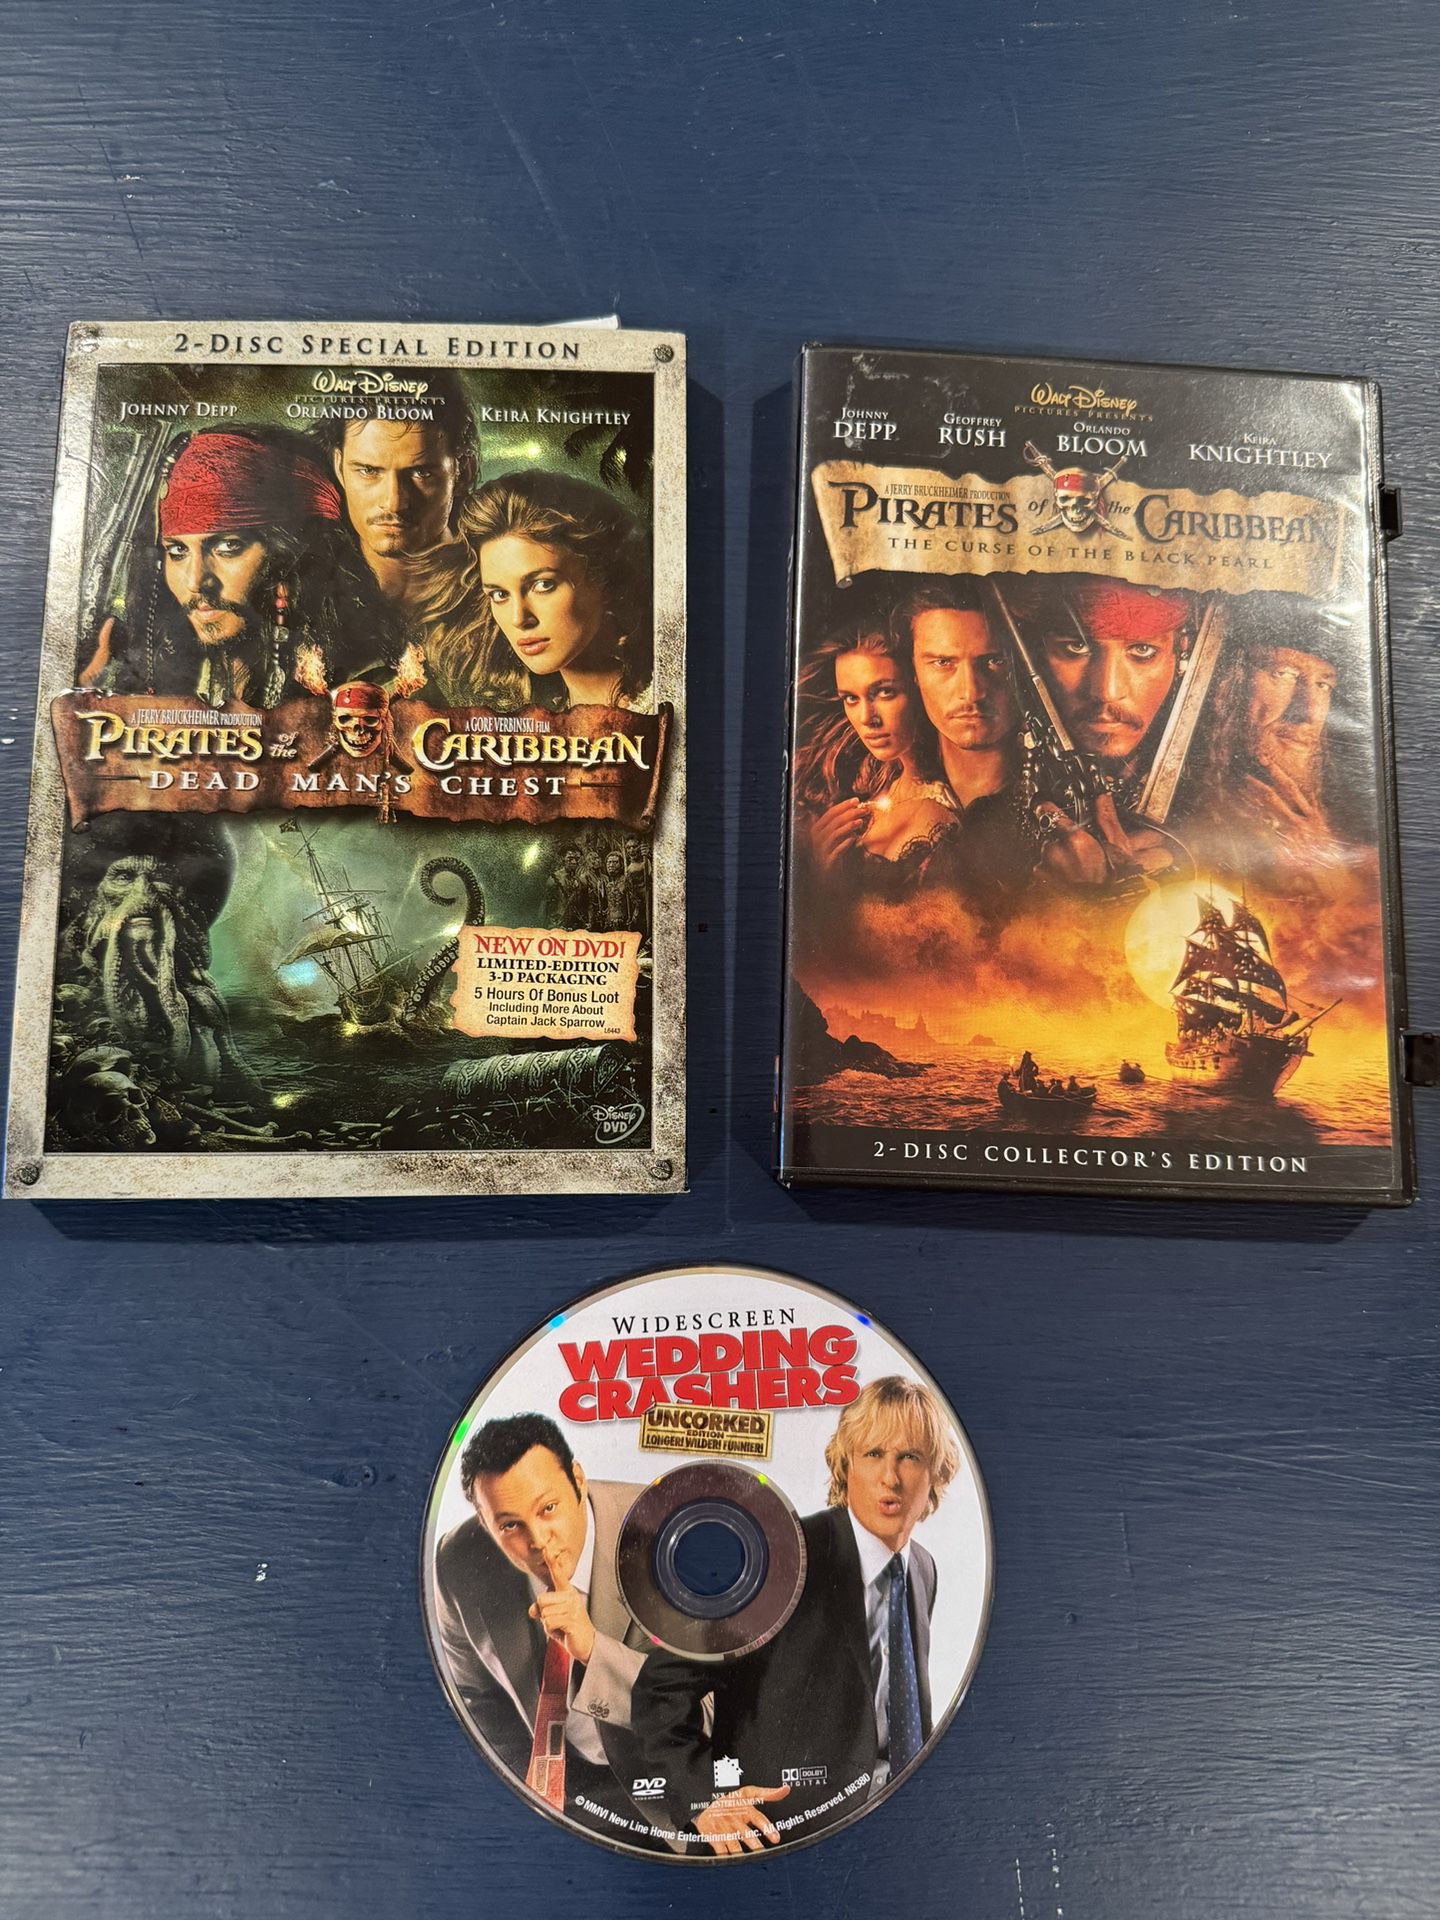 Pirates of the Caribbean DVD sets